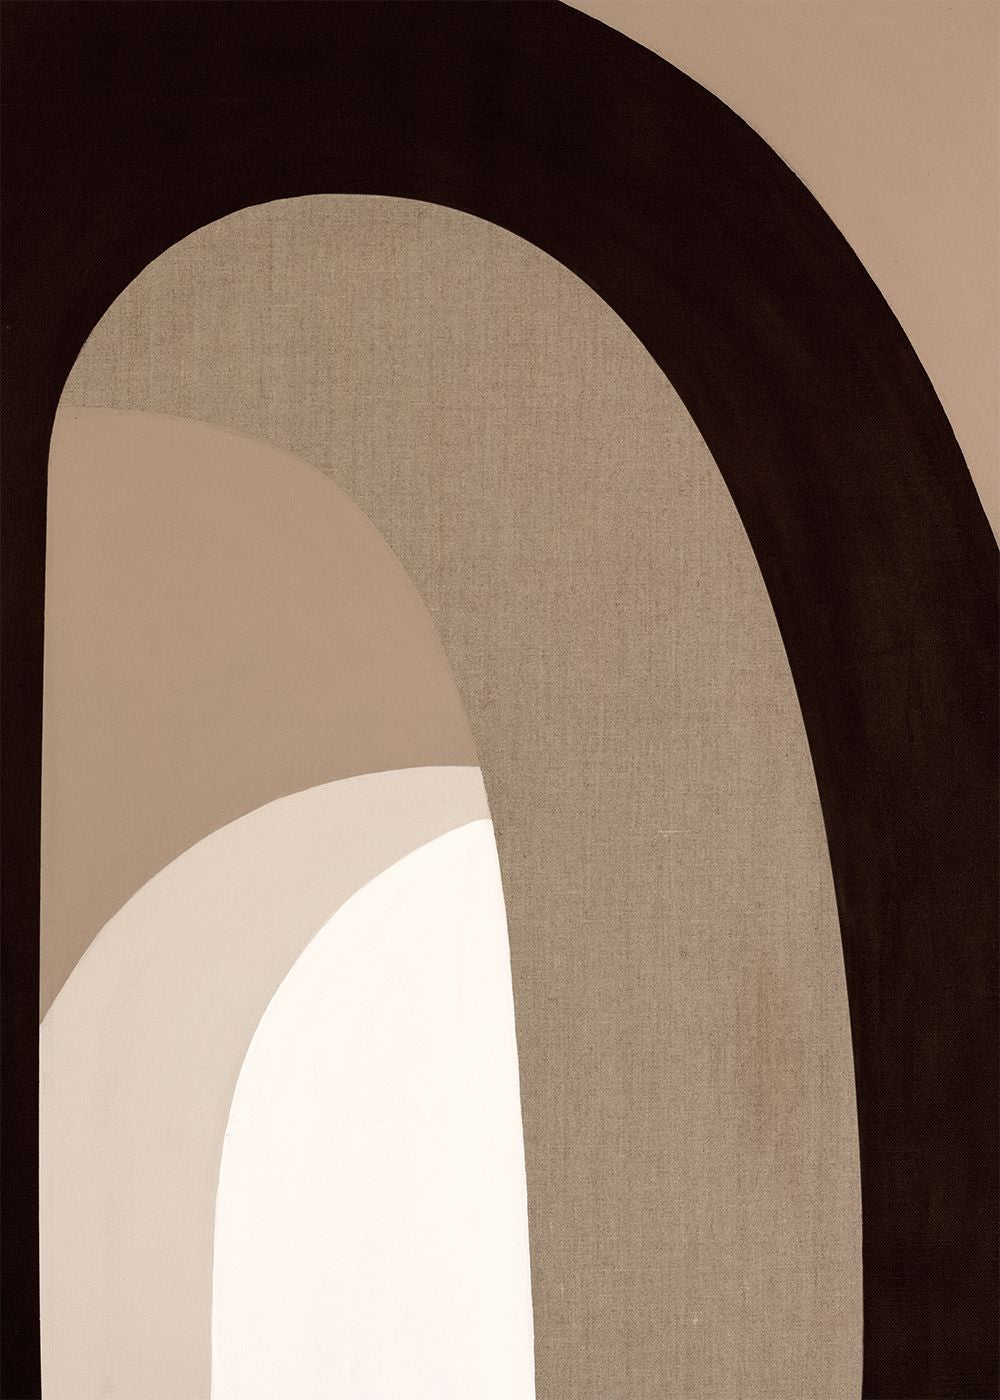 Paper Collective The Arch 01 Affiche, 30x40 cm